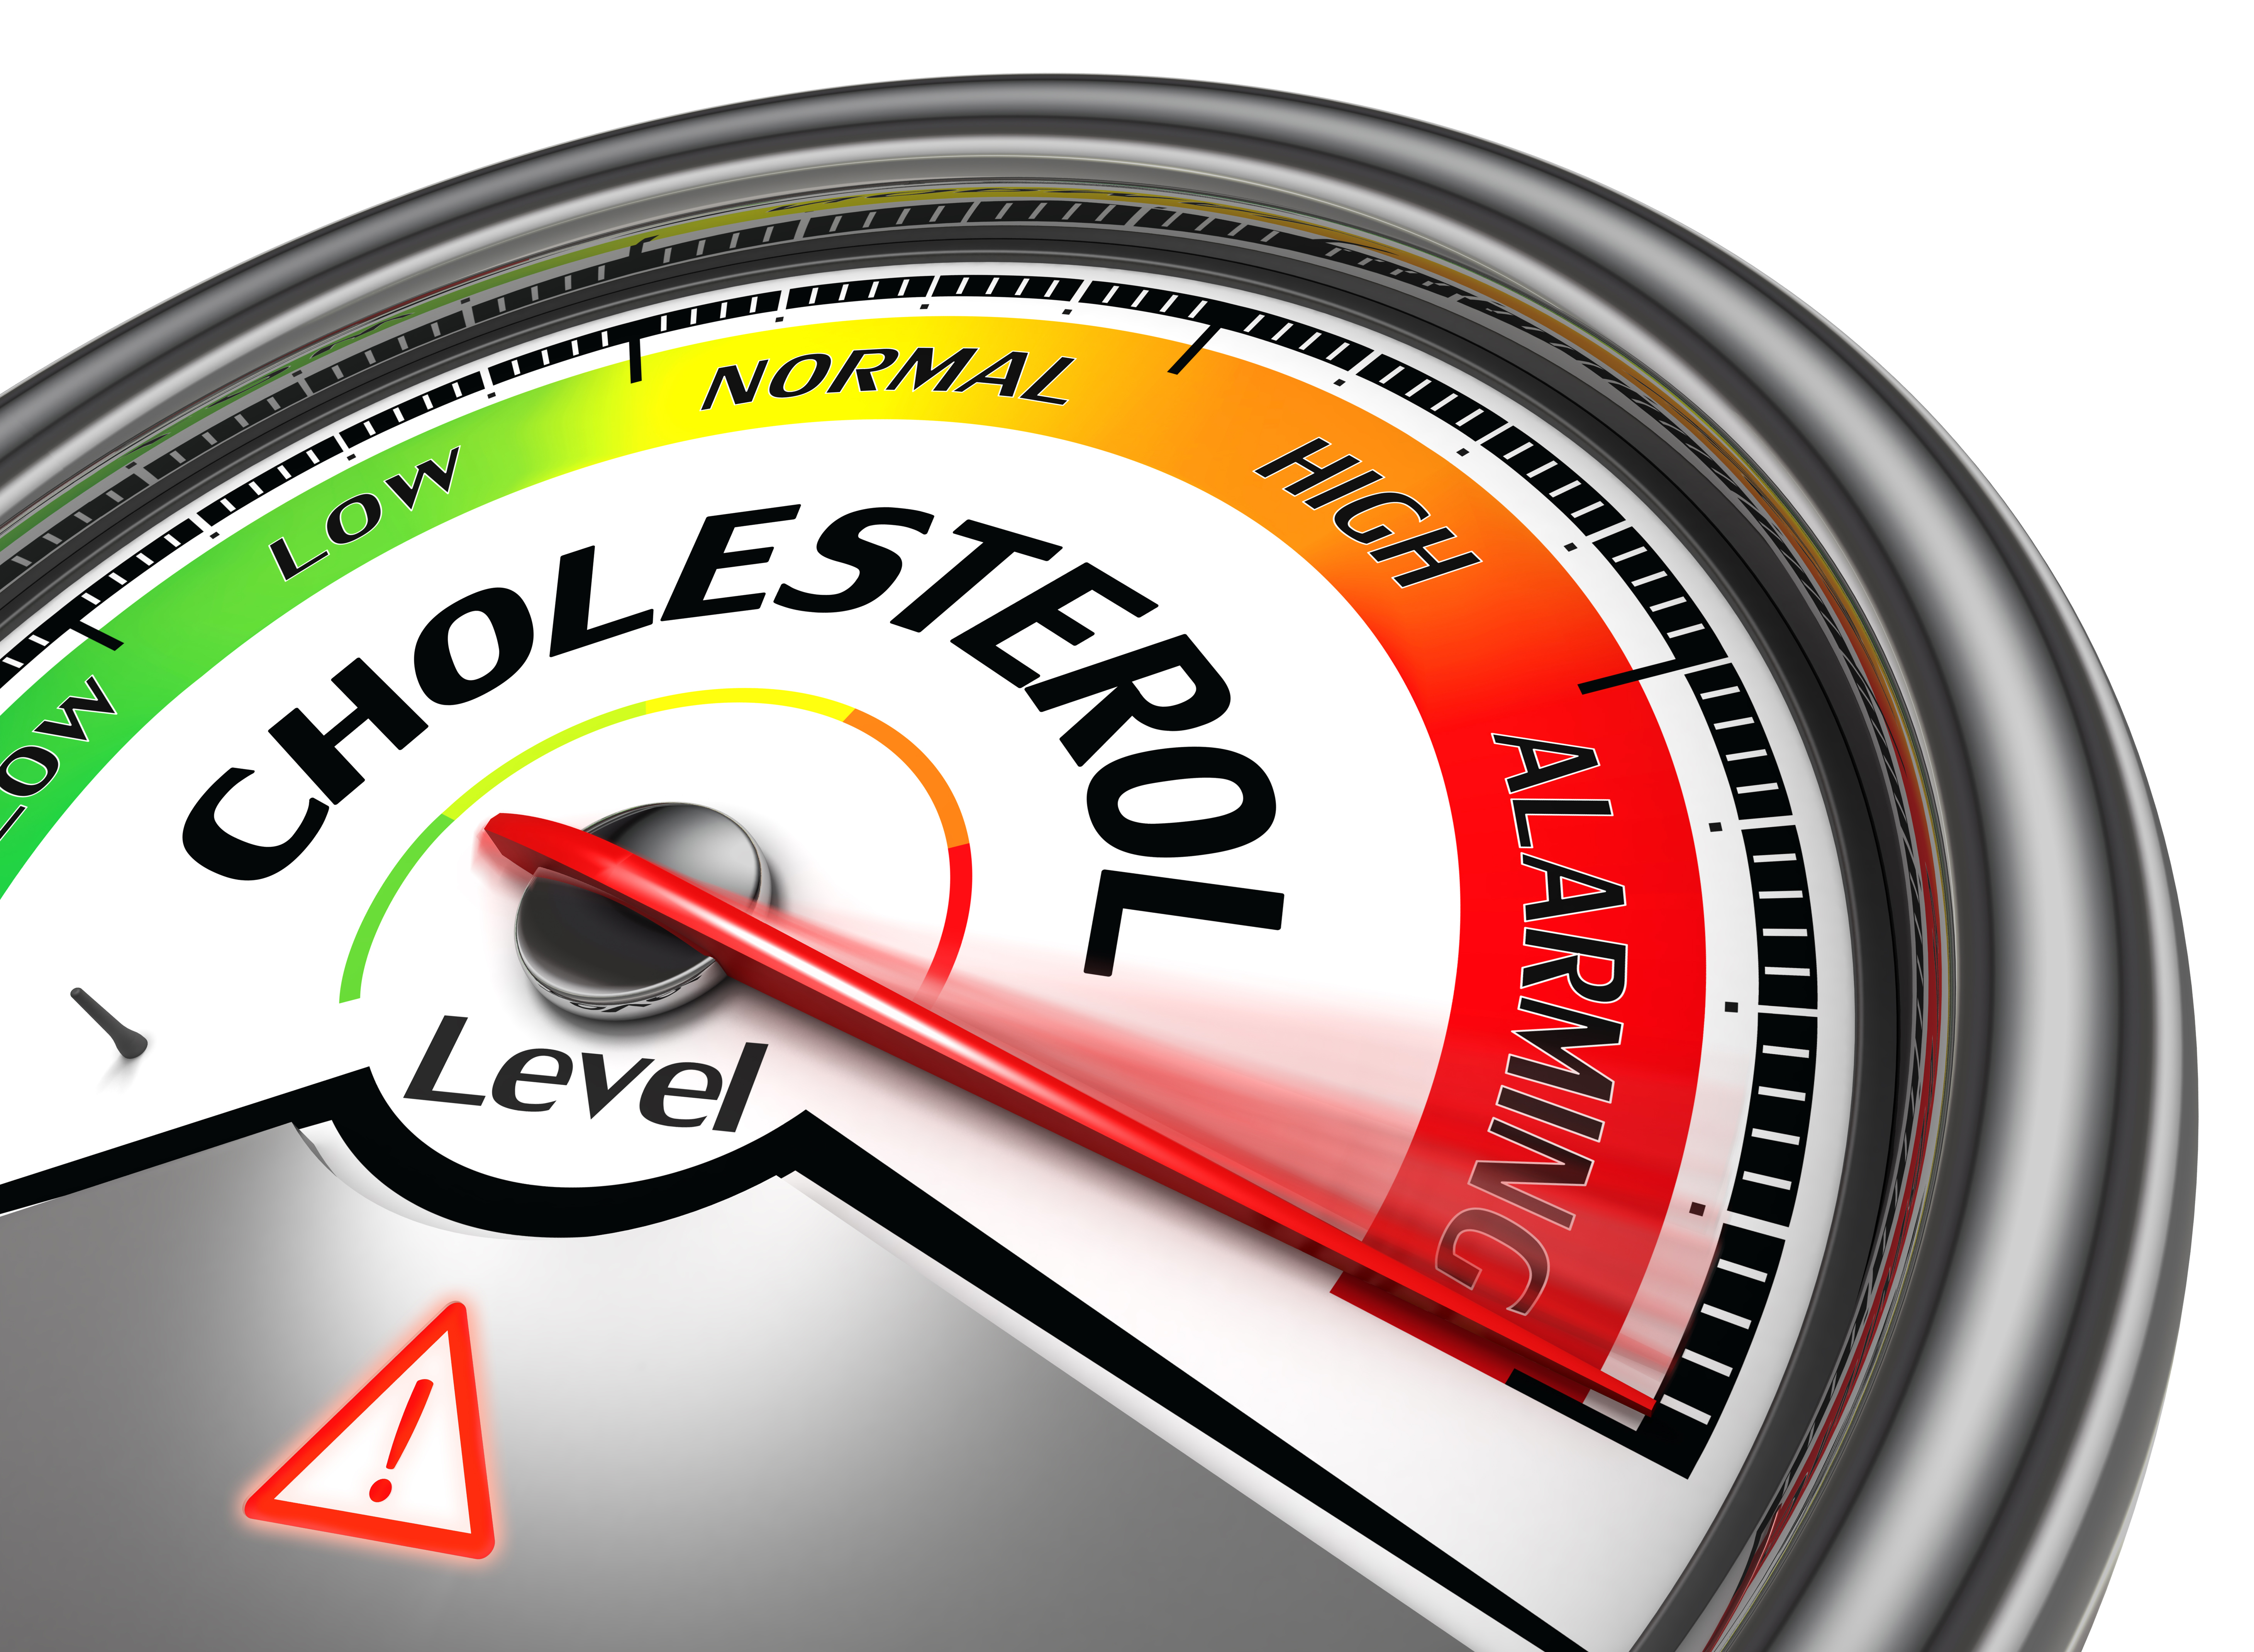 Delhi youths at high risk due to increased levels of cholesterol